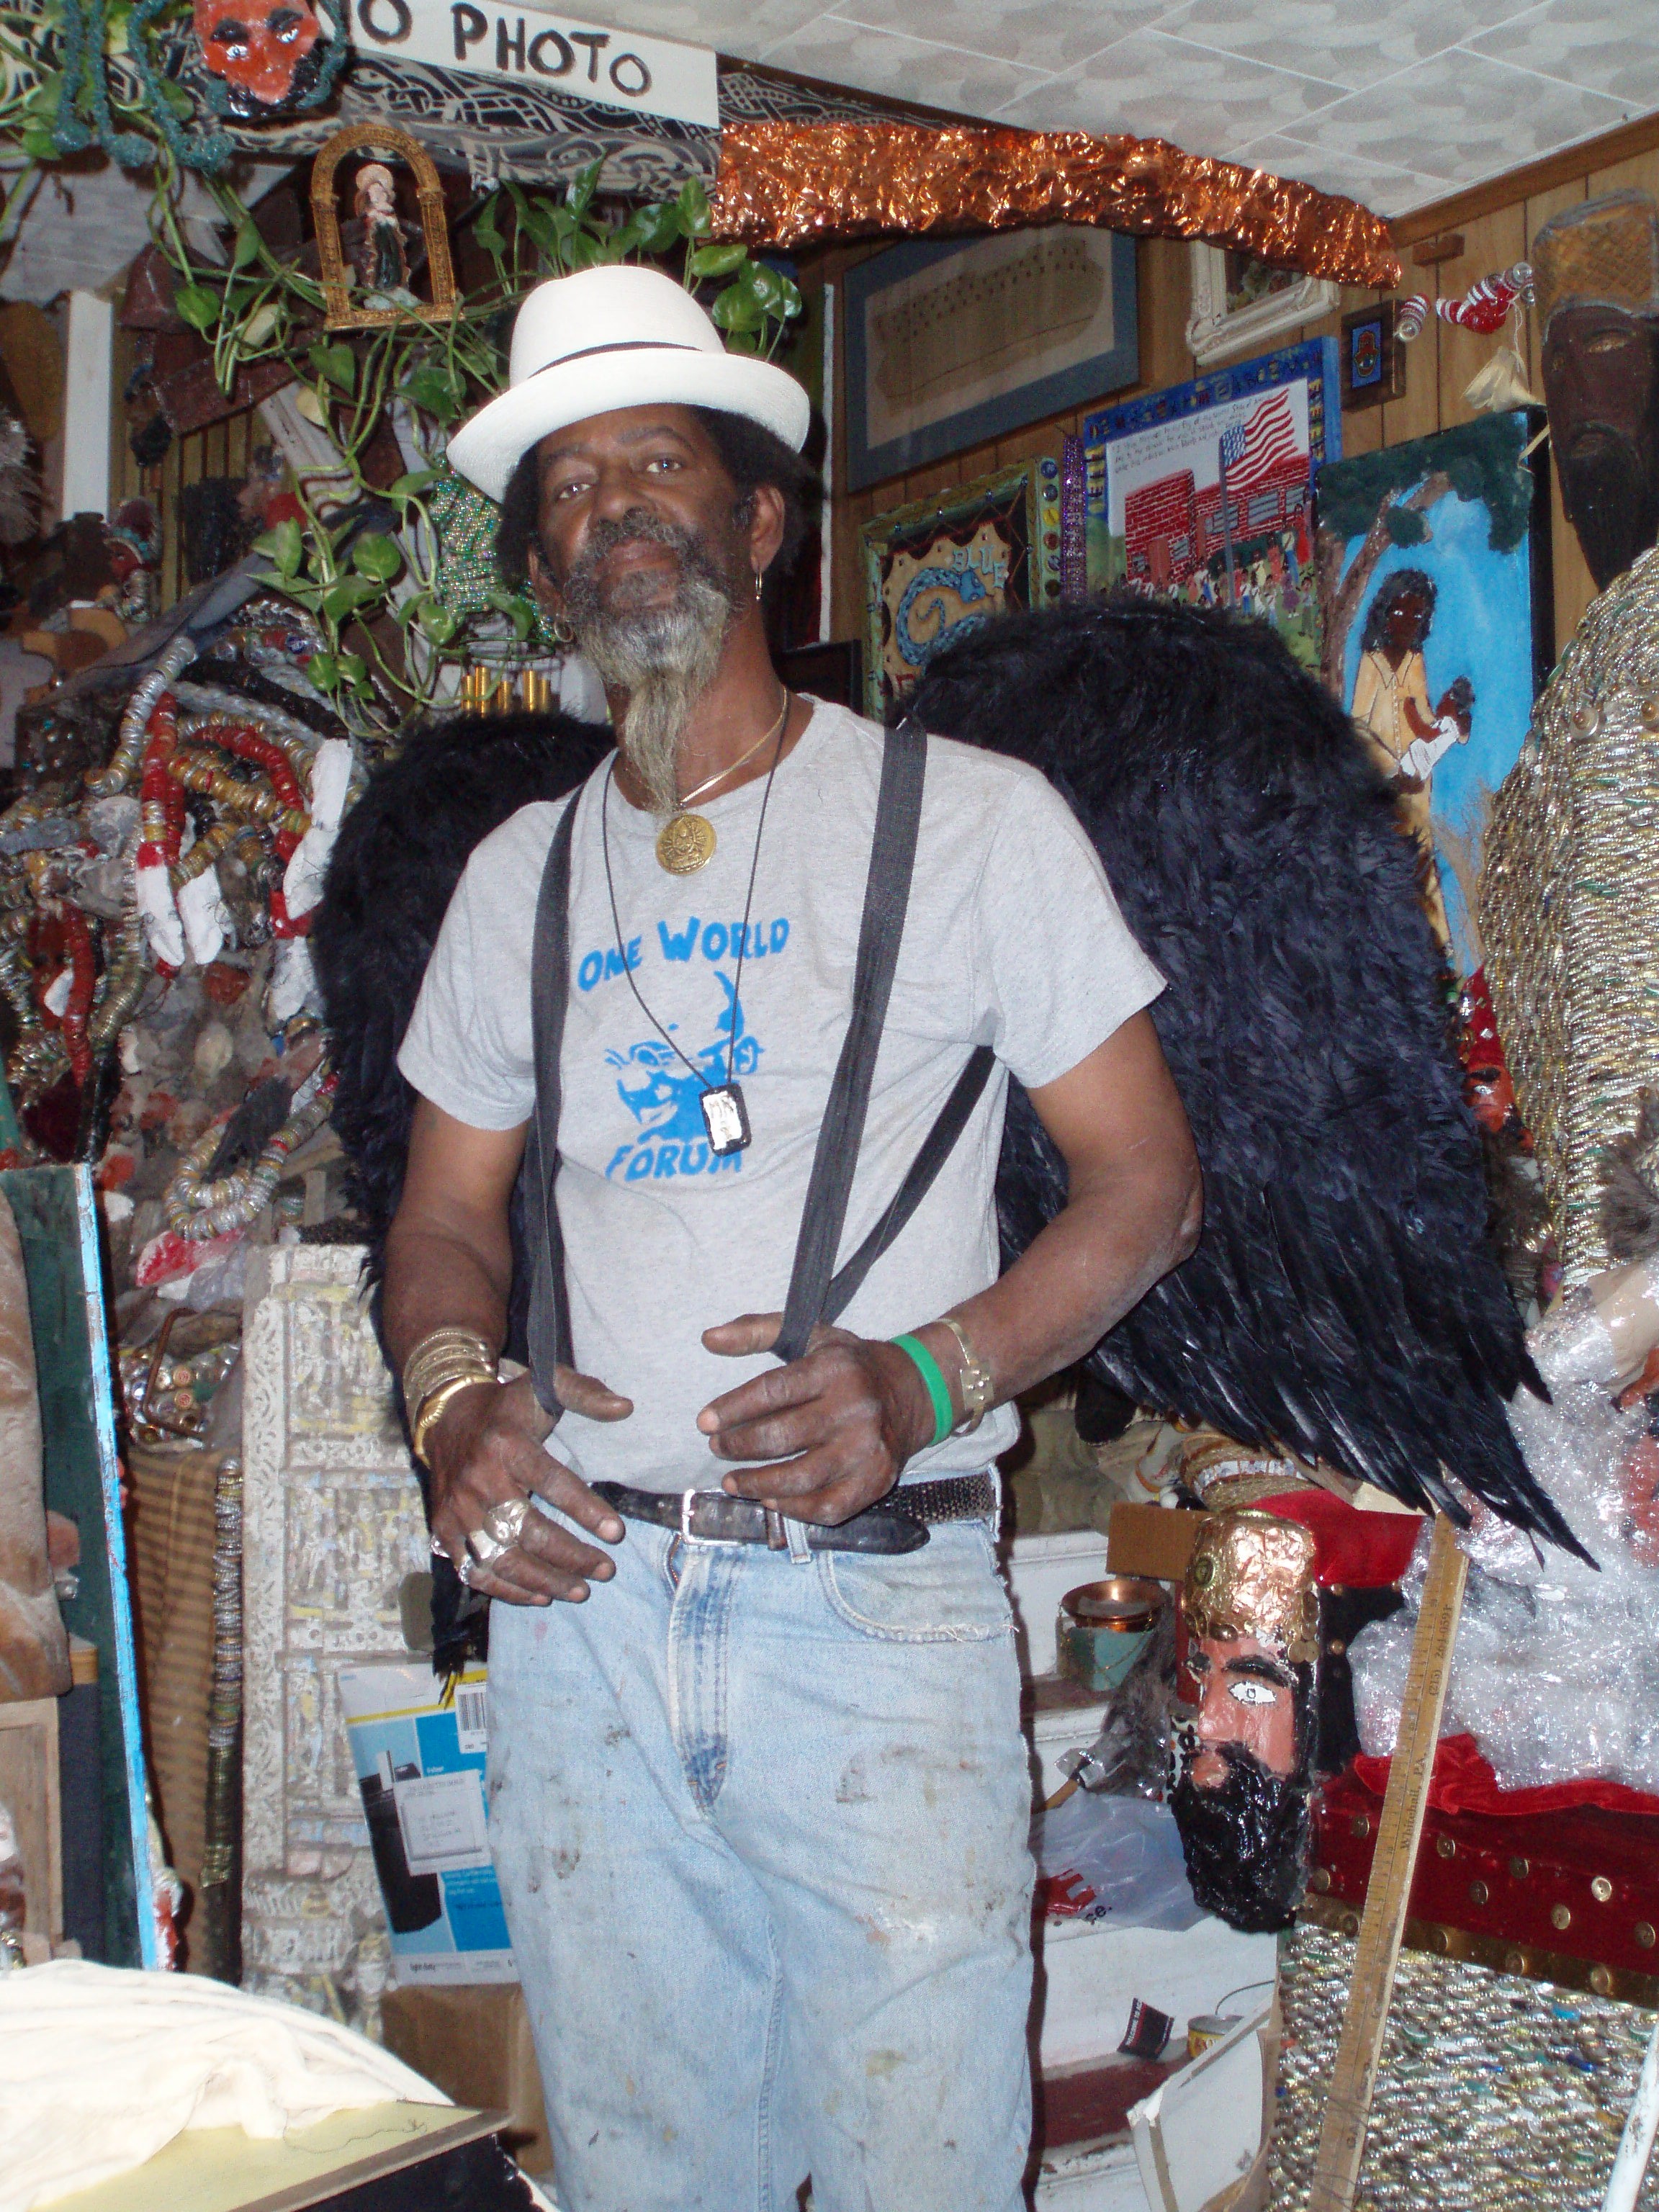 The artist known as Mr. Imagination poses wearing black feathery angel wings